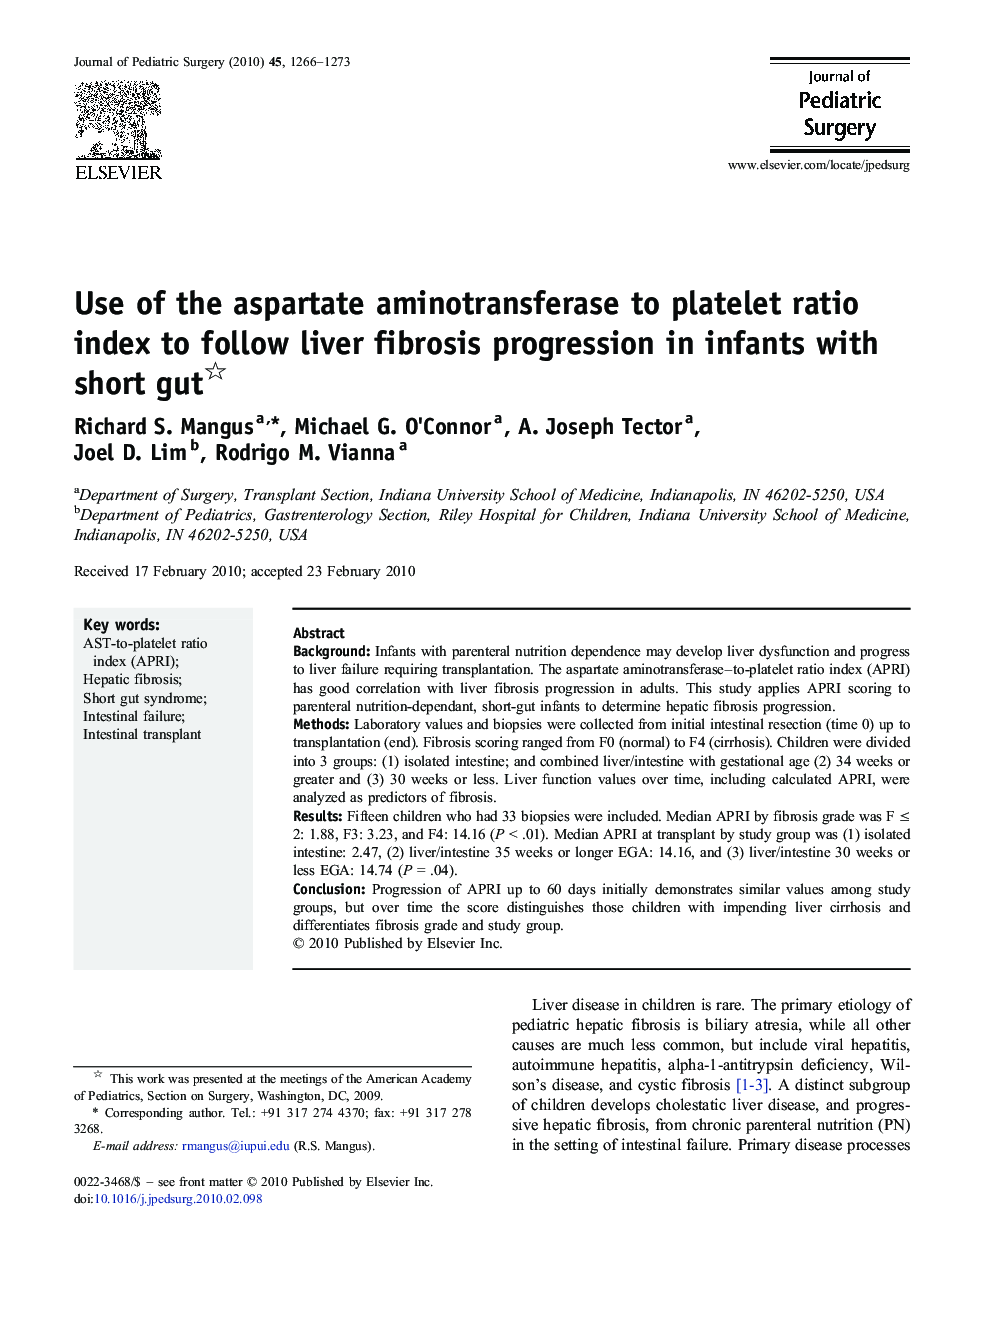 Use of the aspartate aminotransferase to platelet ratio index to follow liver fibrosis progression in infants with short gut 